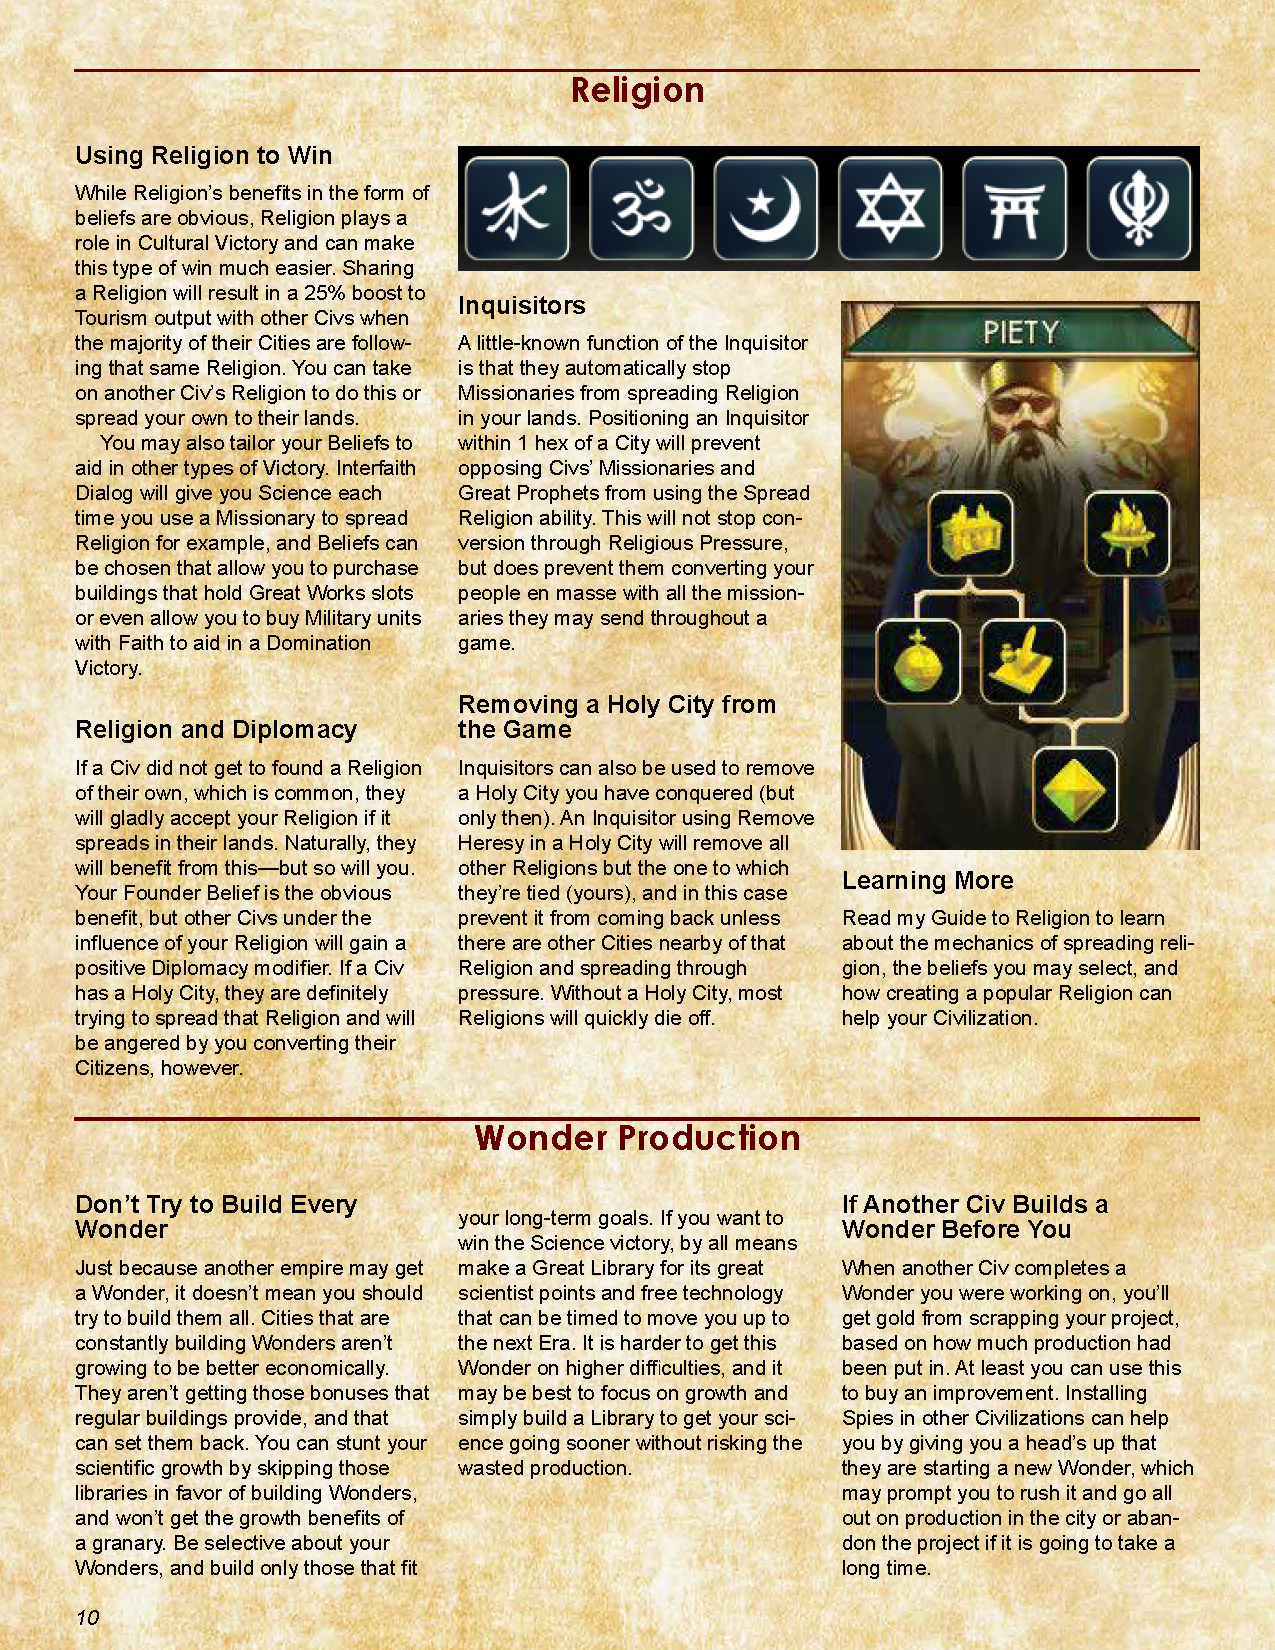 Civ 5 strategy guide (class exercise)